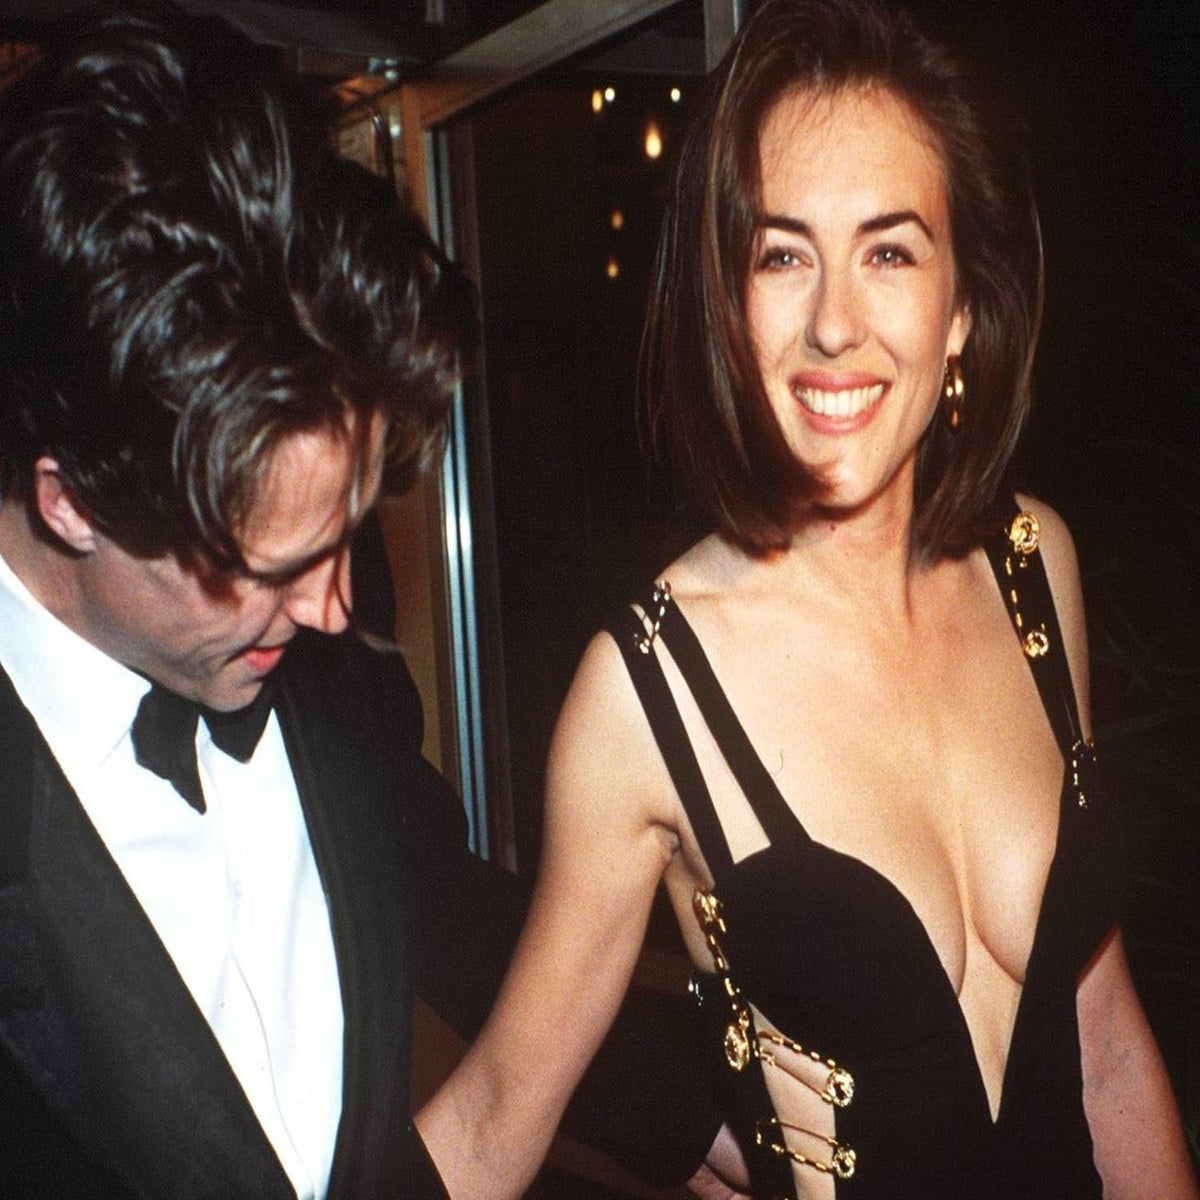 Hugh Grant: Liz Hurley only wore Versace safety-pin dress because